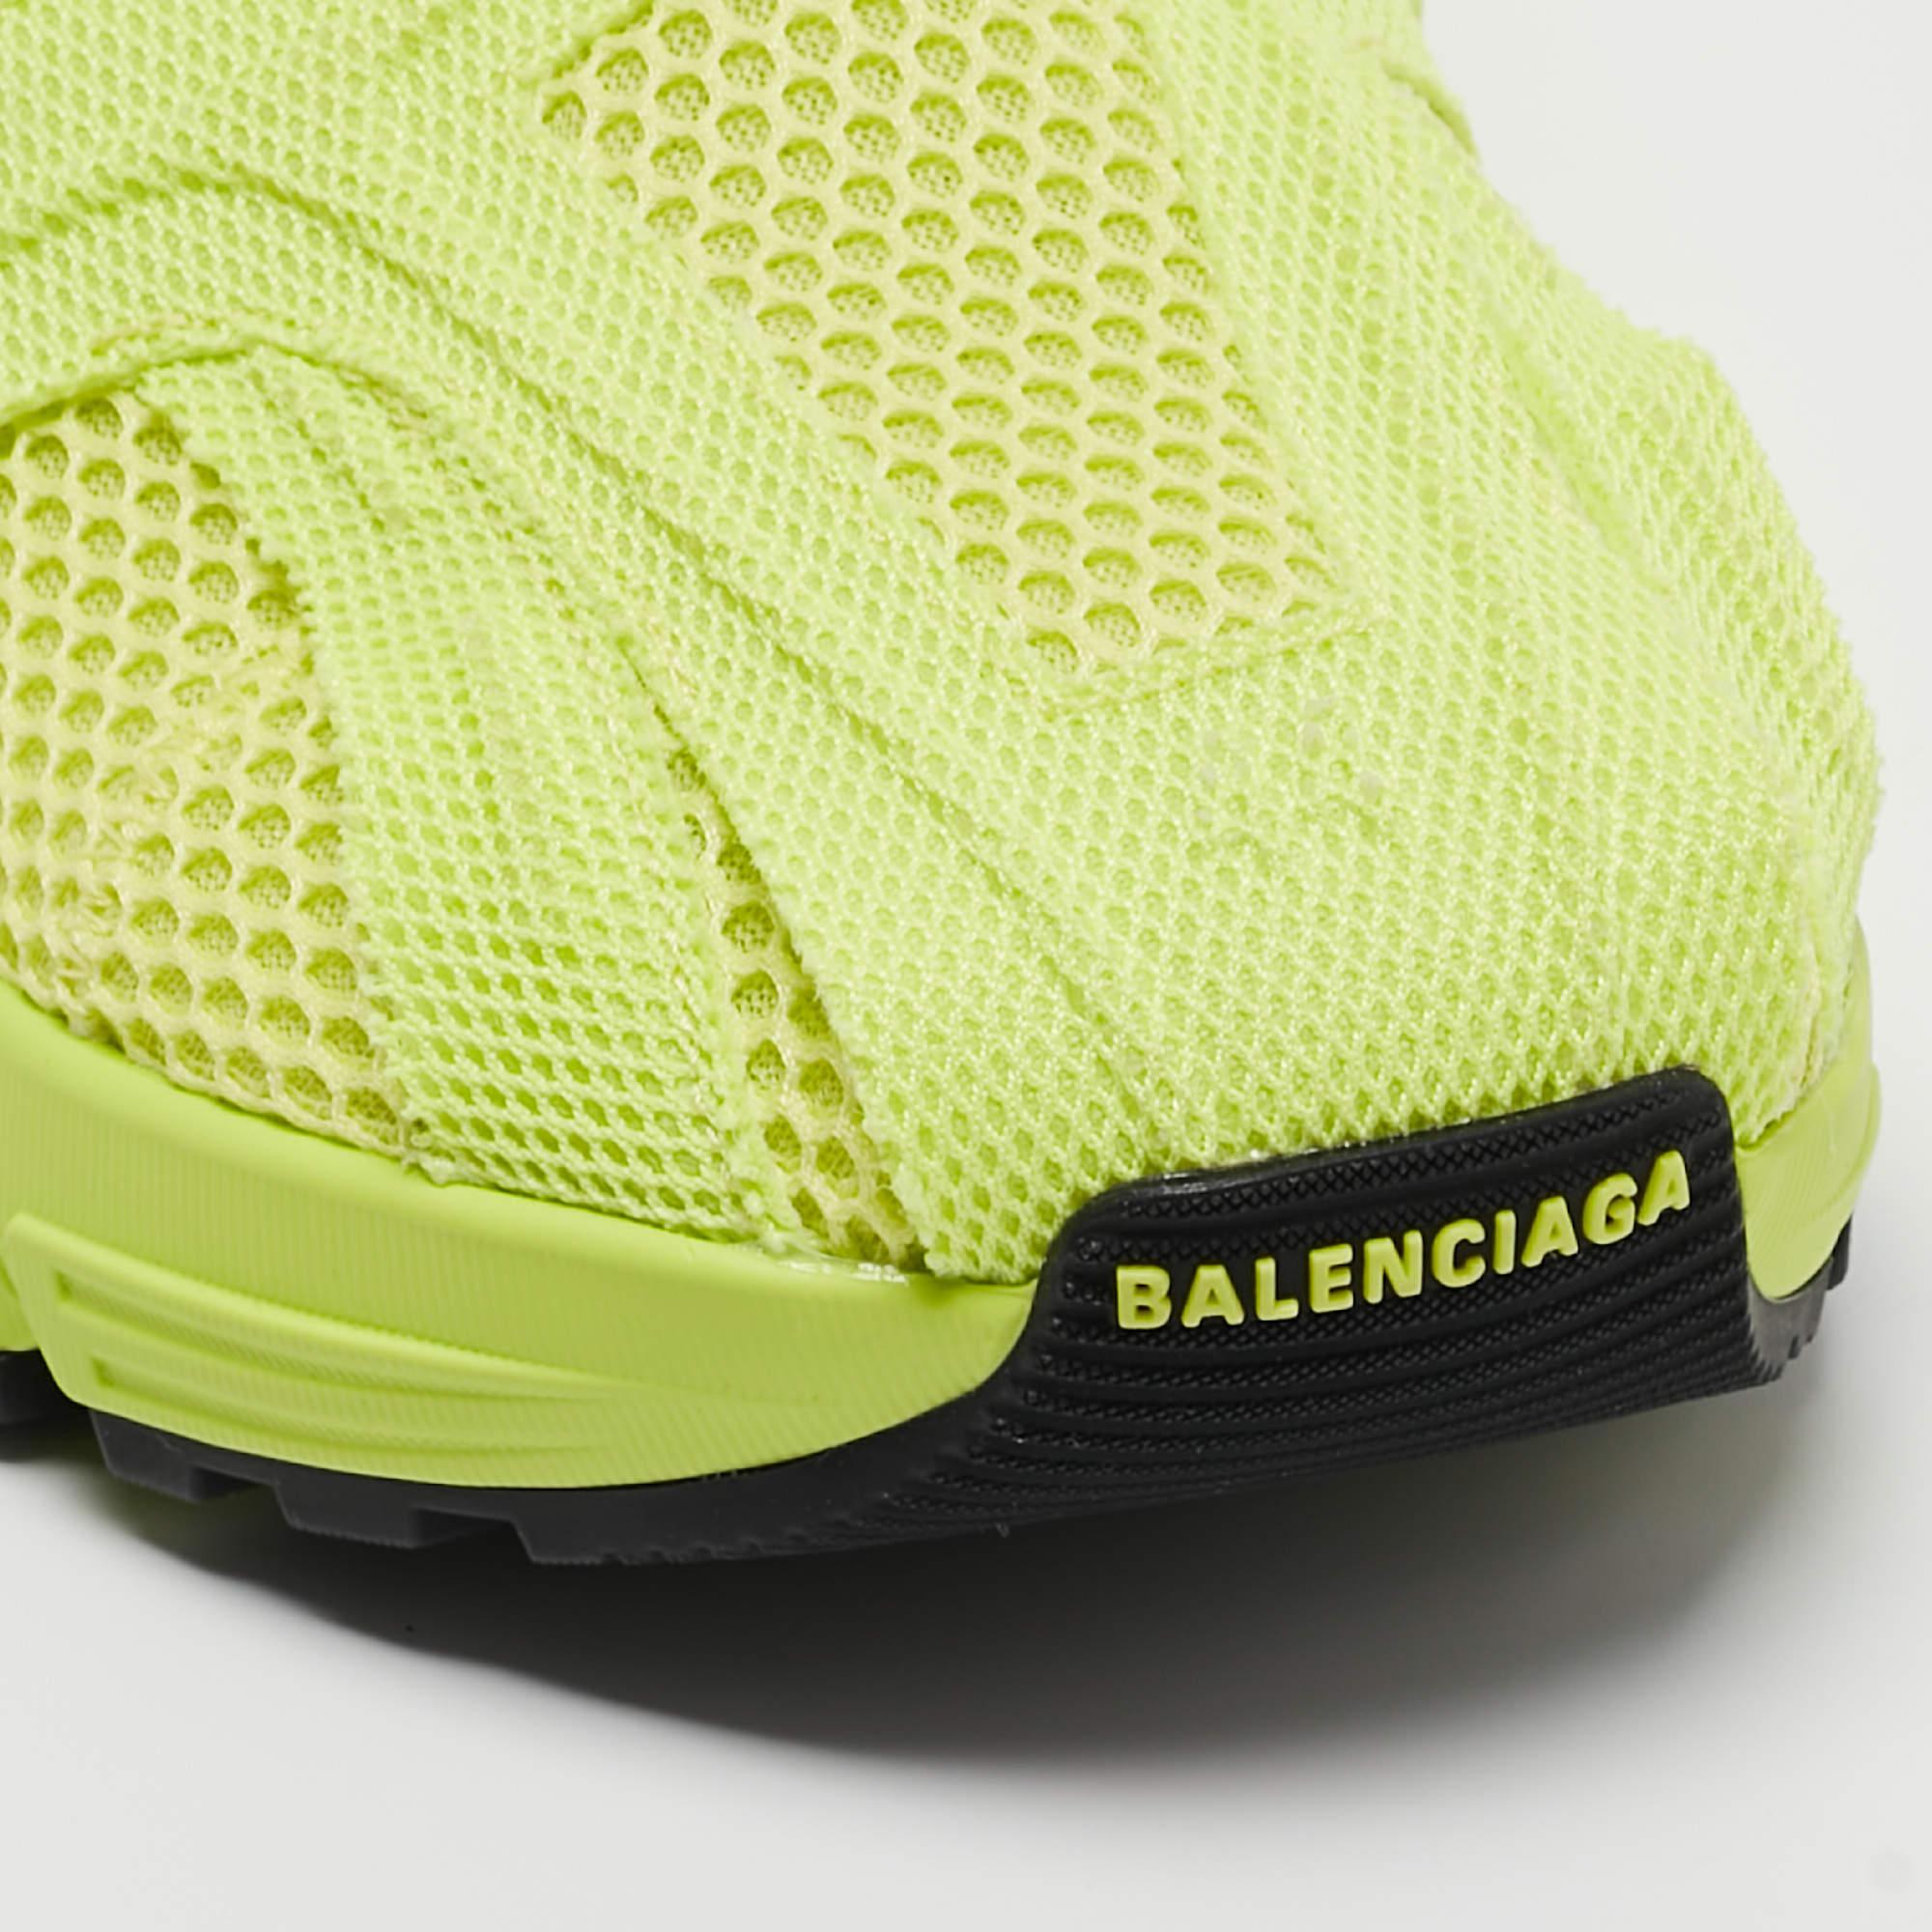 Balenciaga Green Mesh And Fabric Low Top Sneakers Size 44 For Sale 2